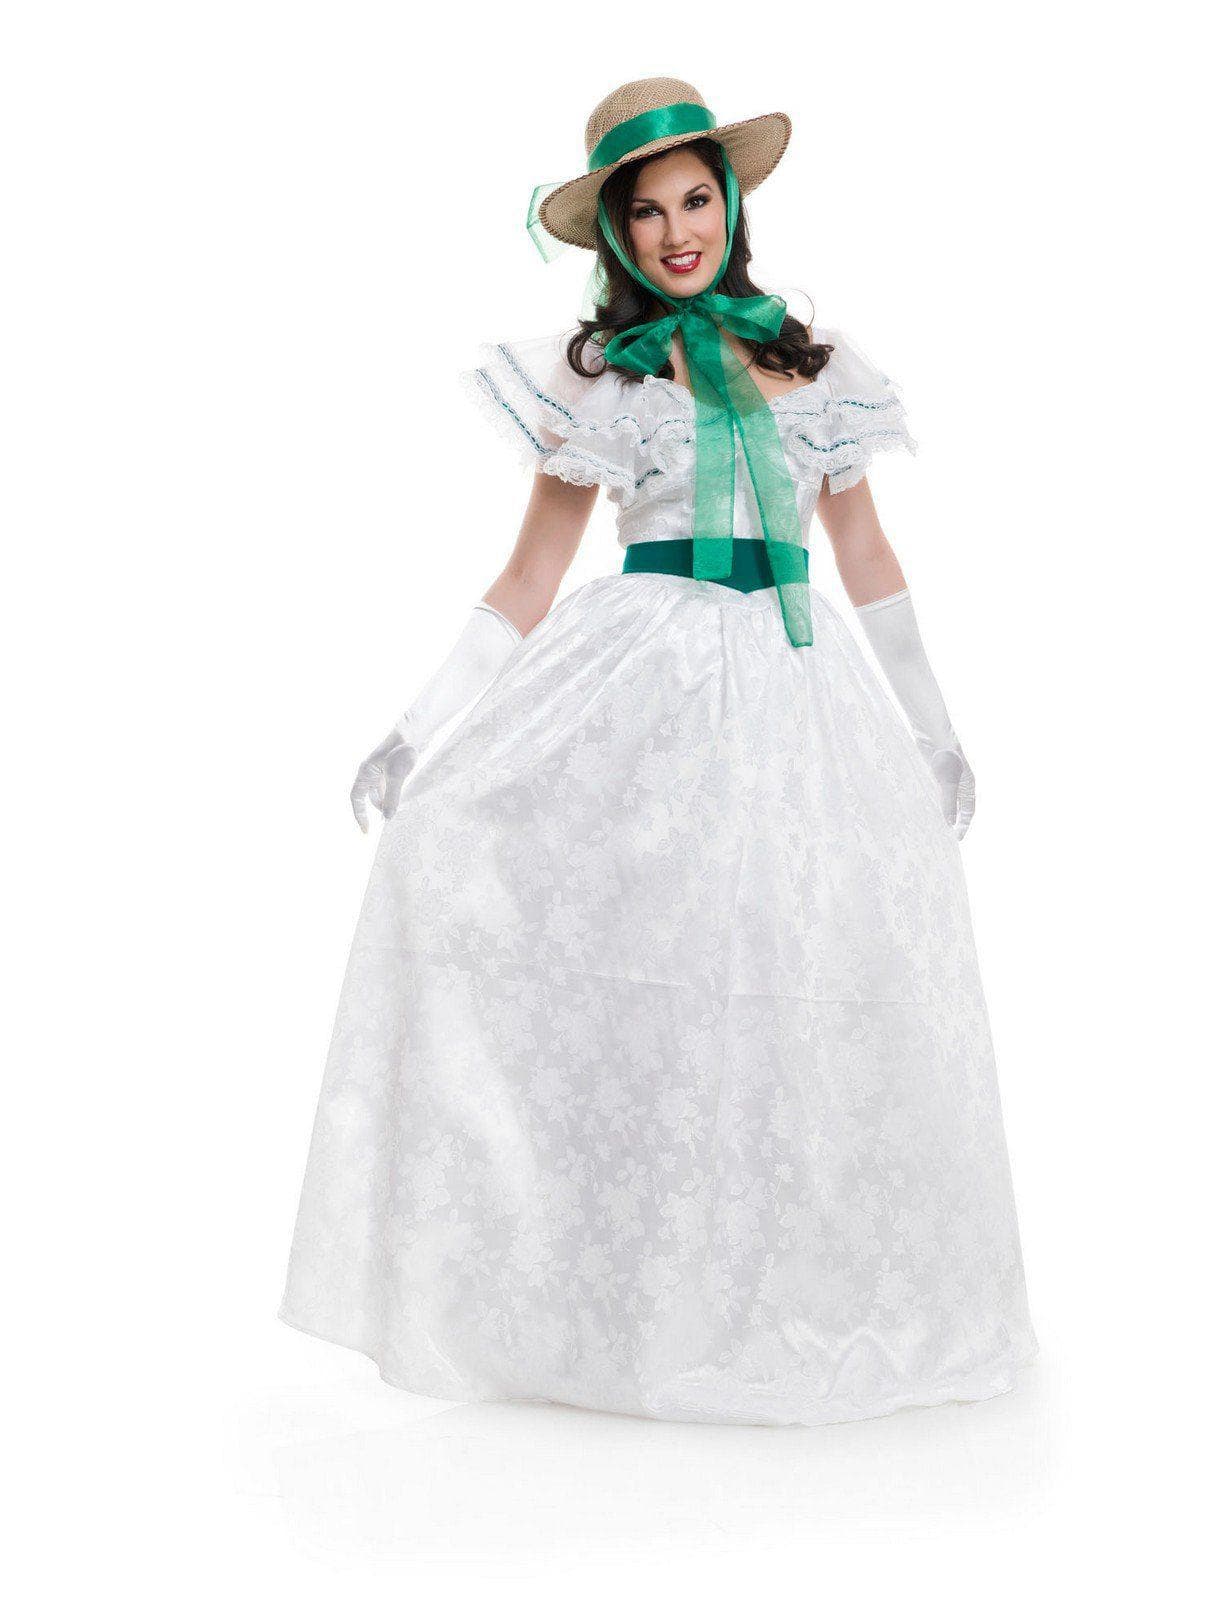 Adult Southern Belle Costume - costumes.com